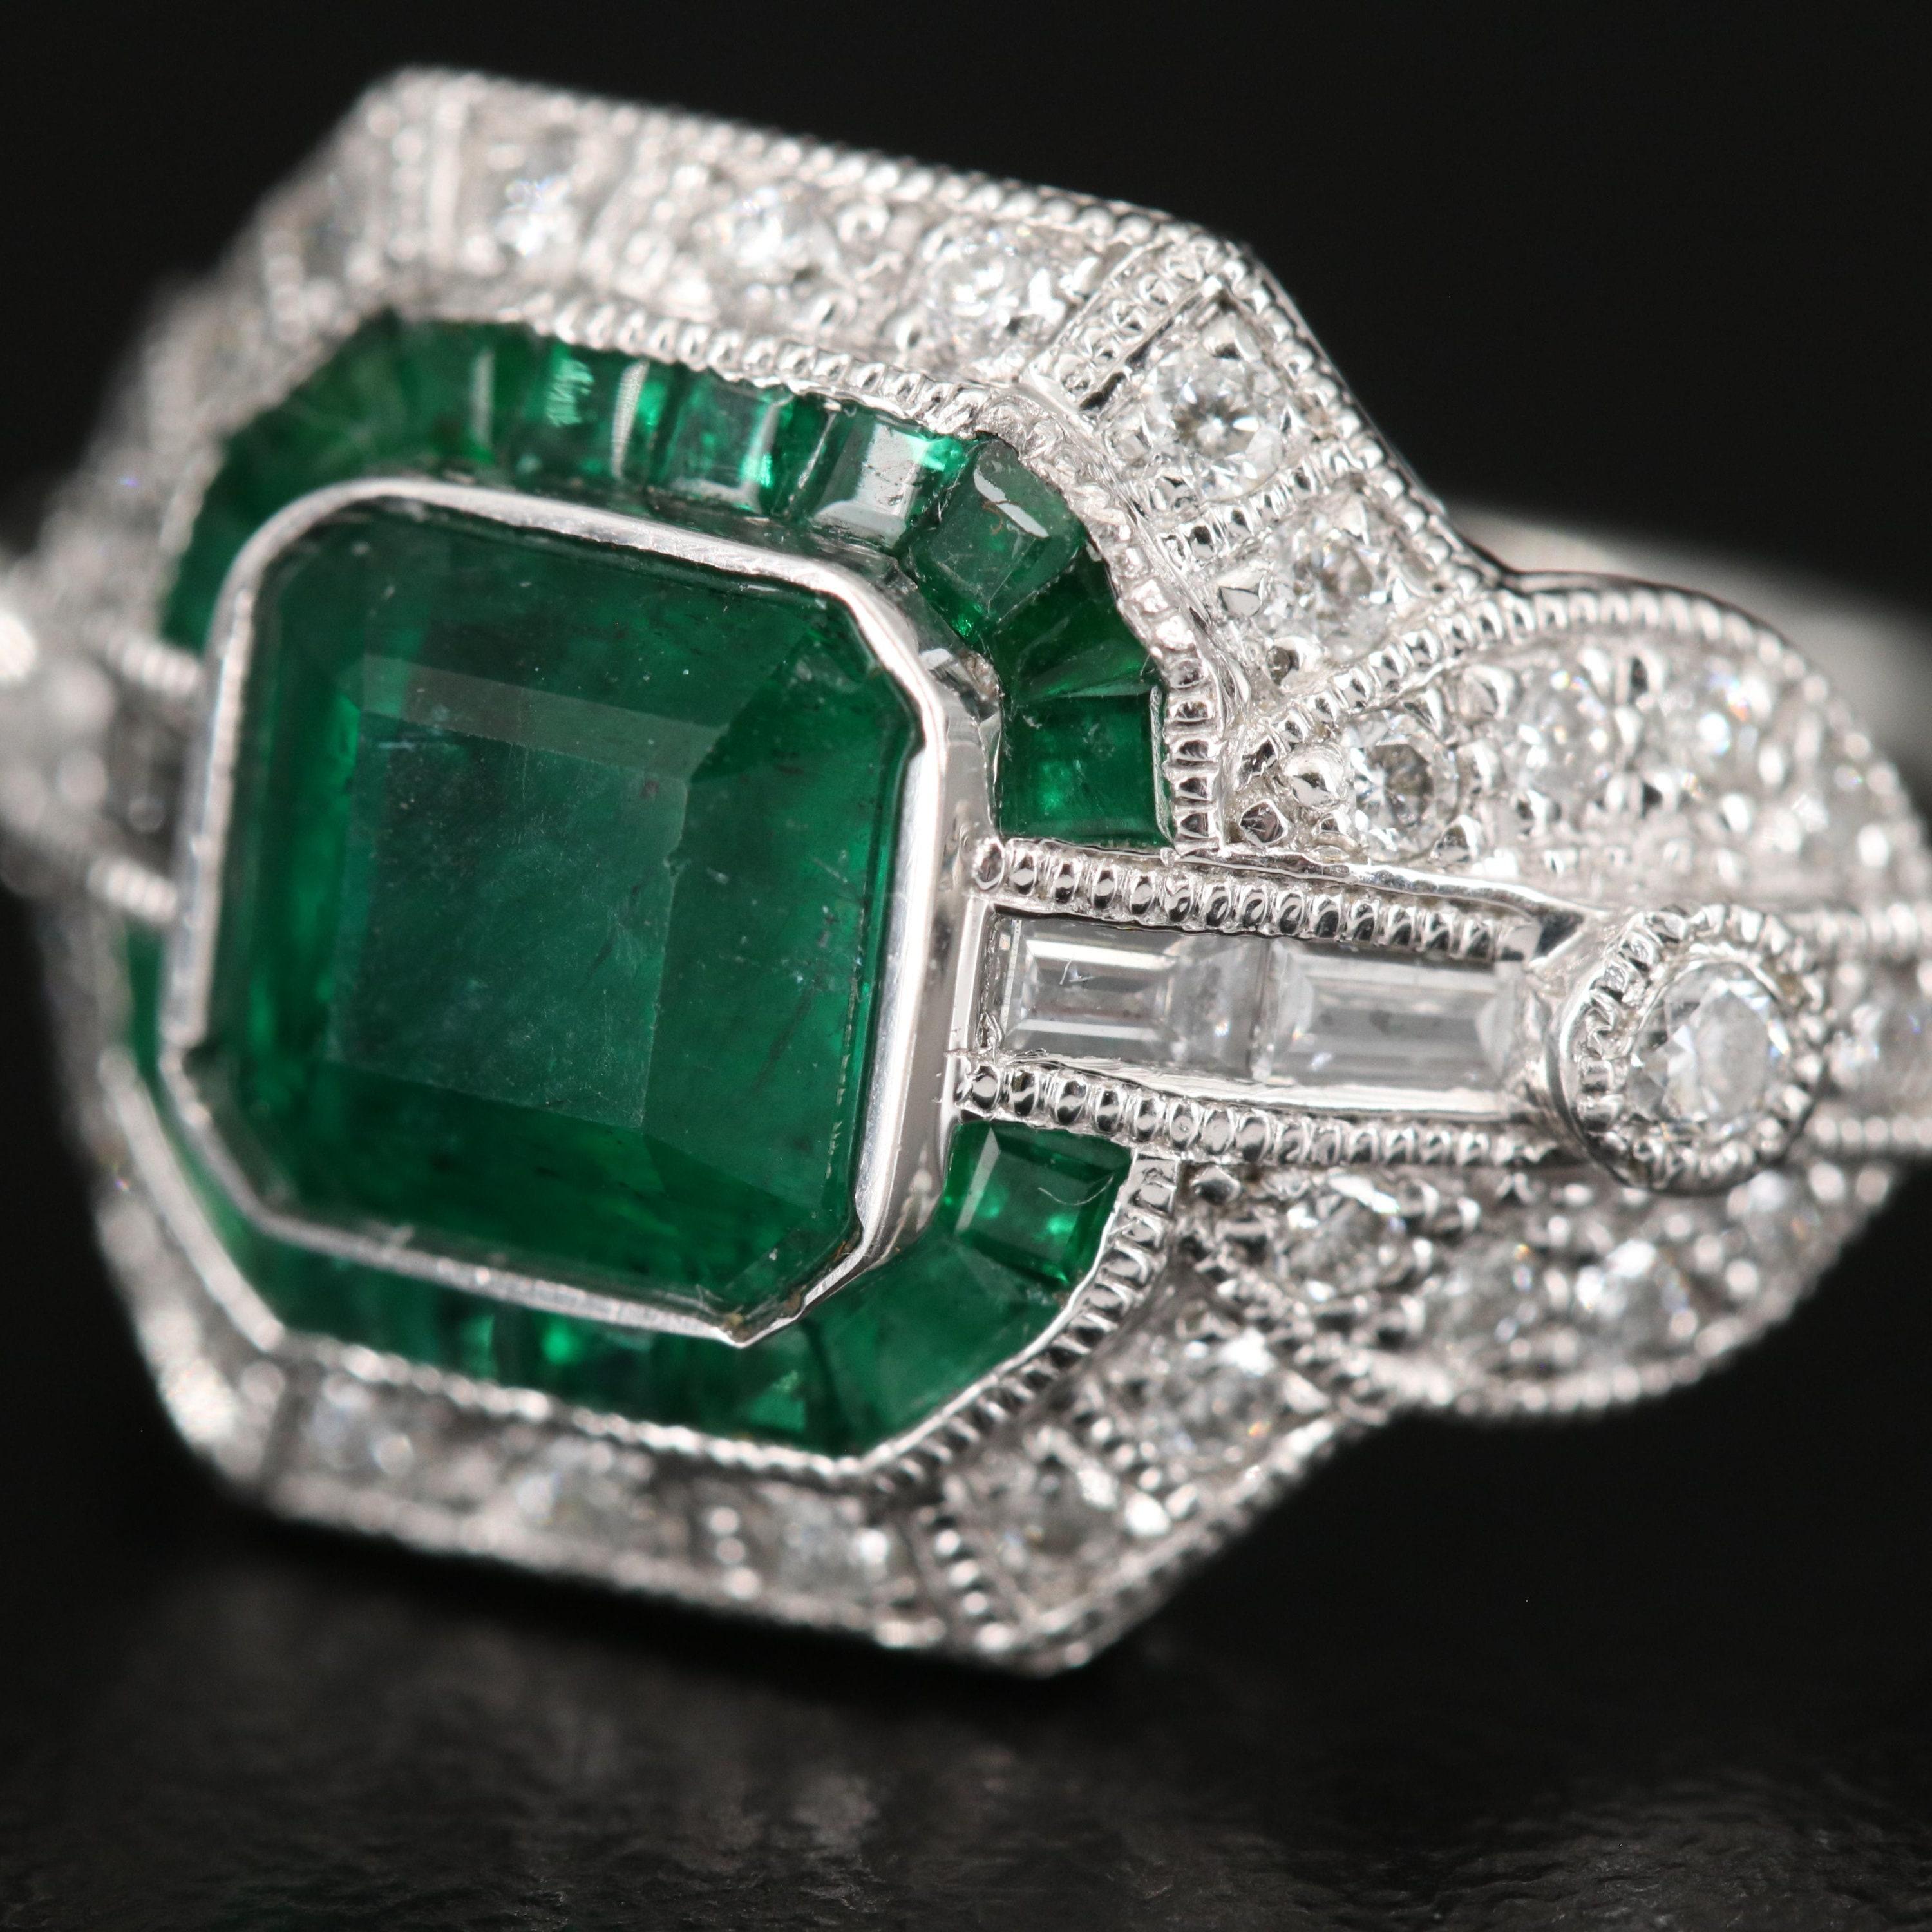 For Sale:  Vintage 4.2 Carat Emerald Diamond Engagement Ring, Cluster Diamond Cocktail Ring 2